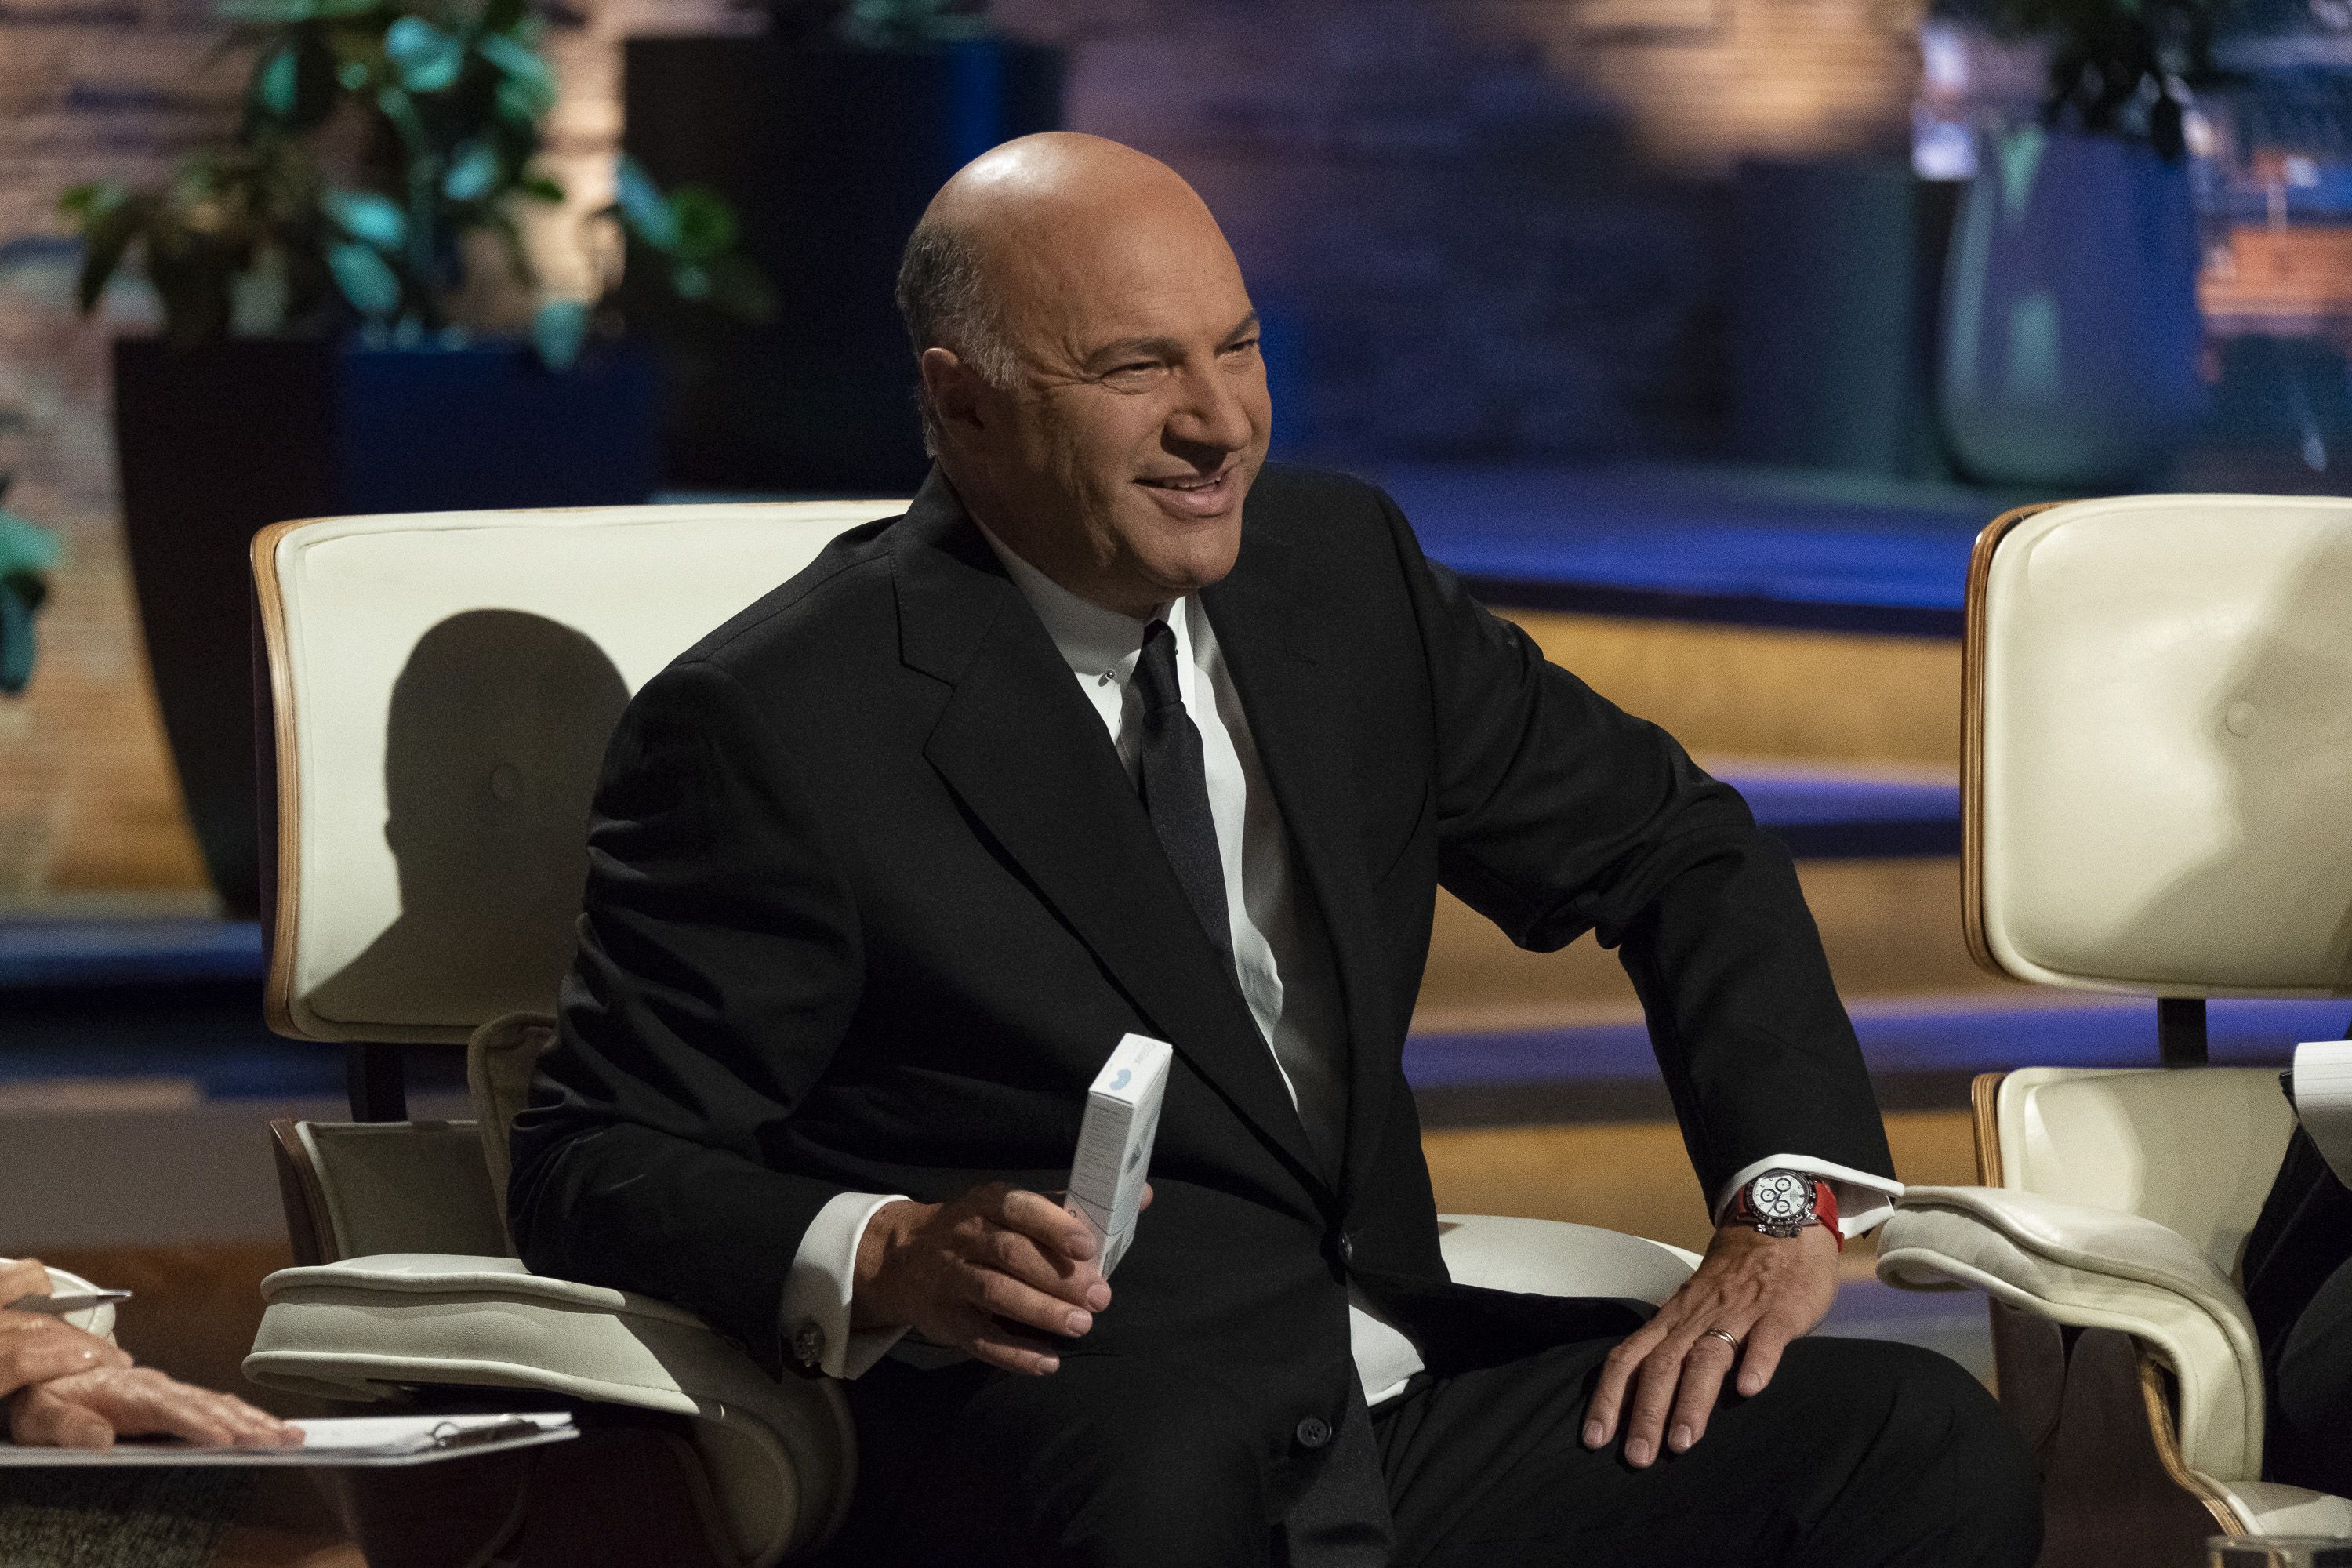 Shark Tank Judge Kevin O'Leary Says He Spends $1,000 Per Day On Food